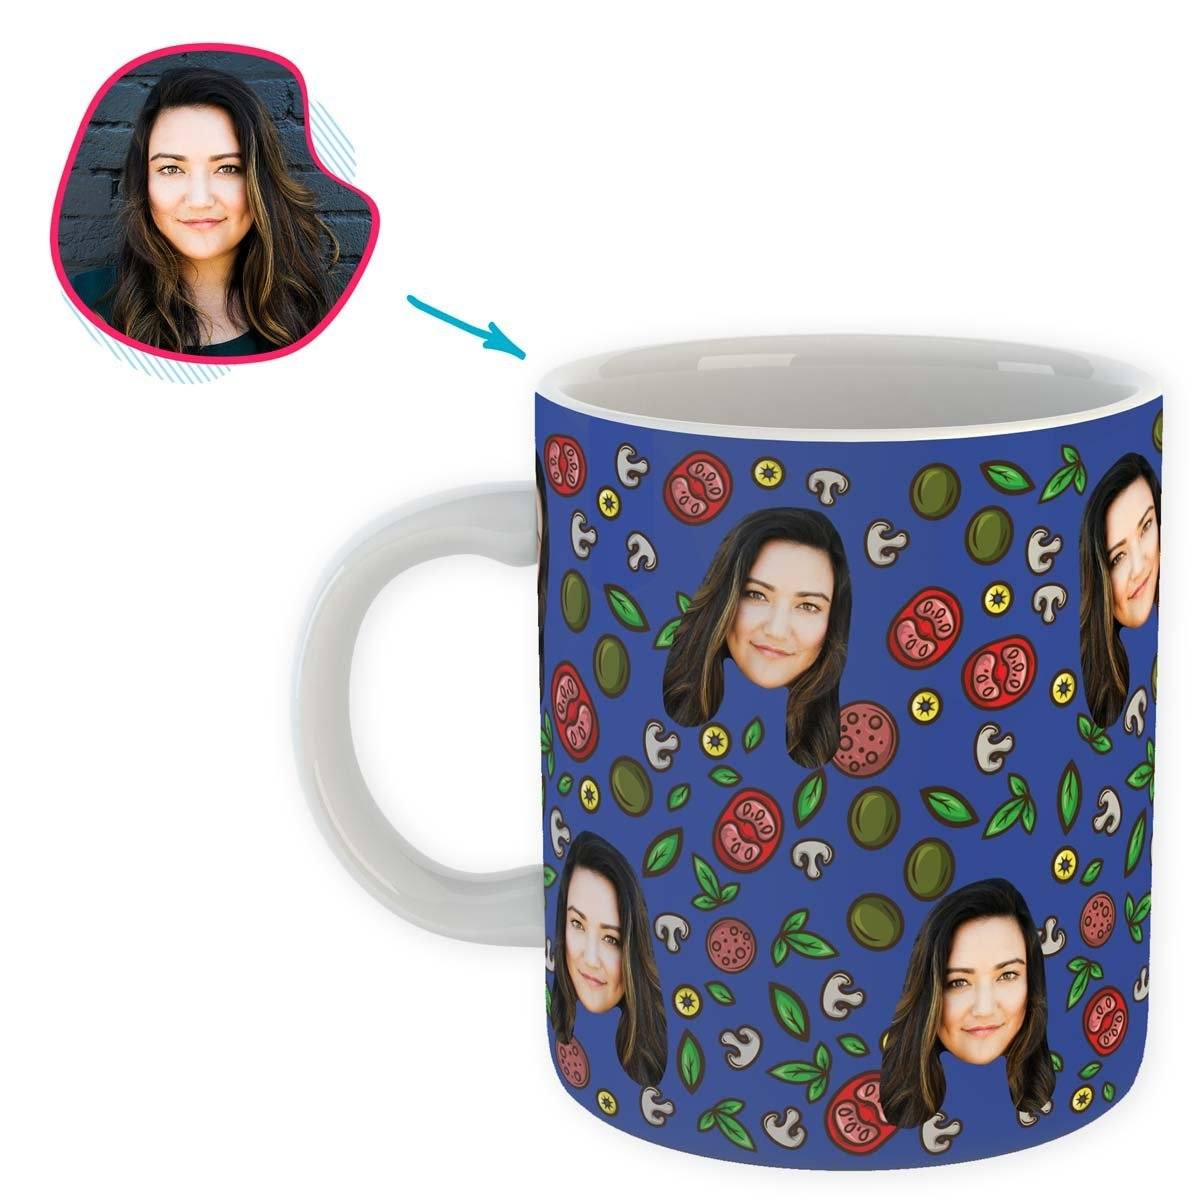 darkblue Pizza mug personalized with photo of face printed on it